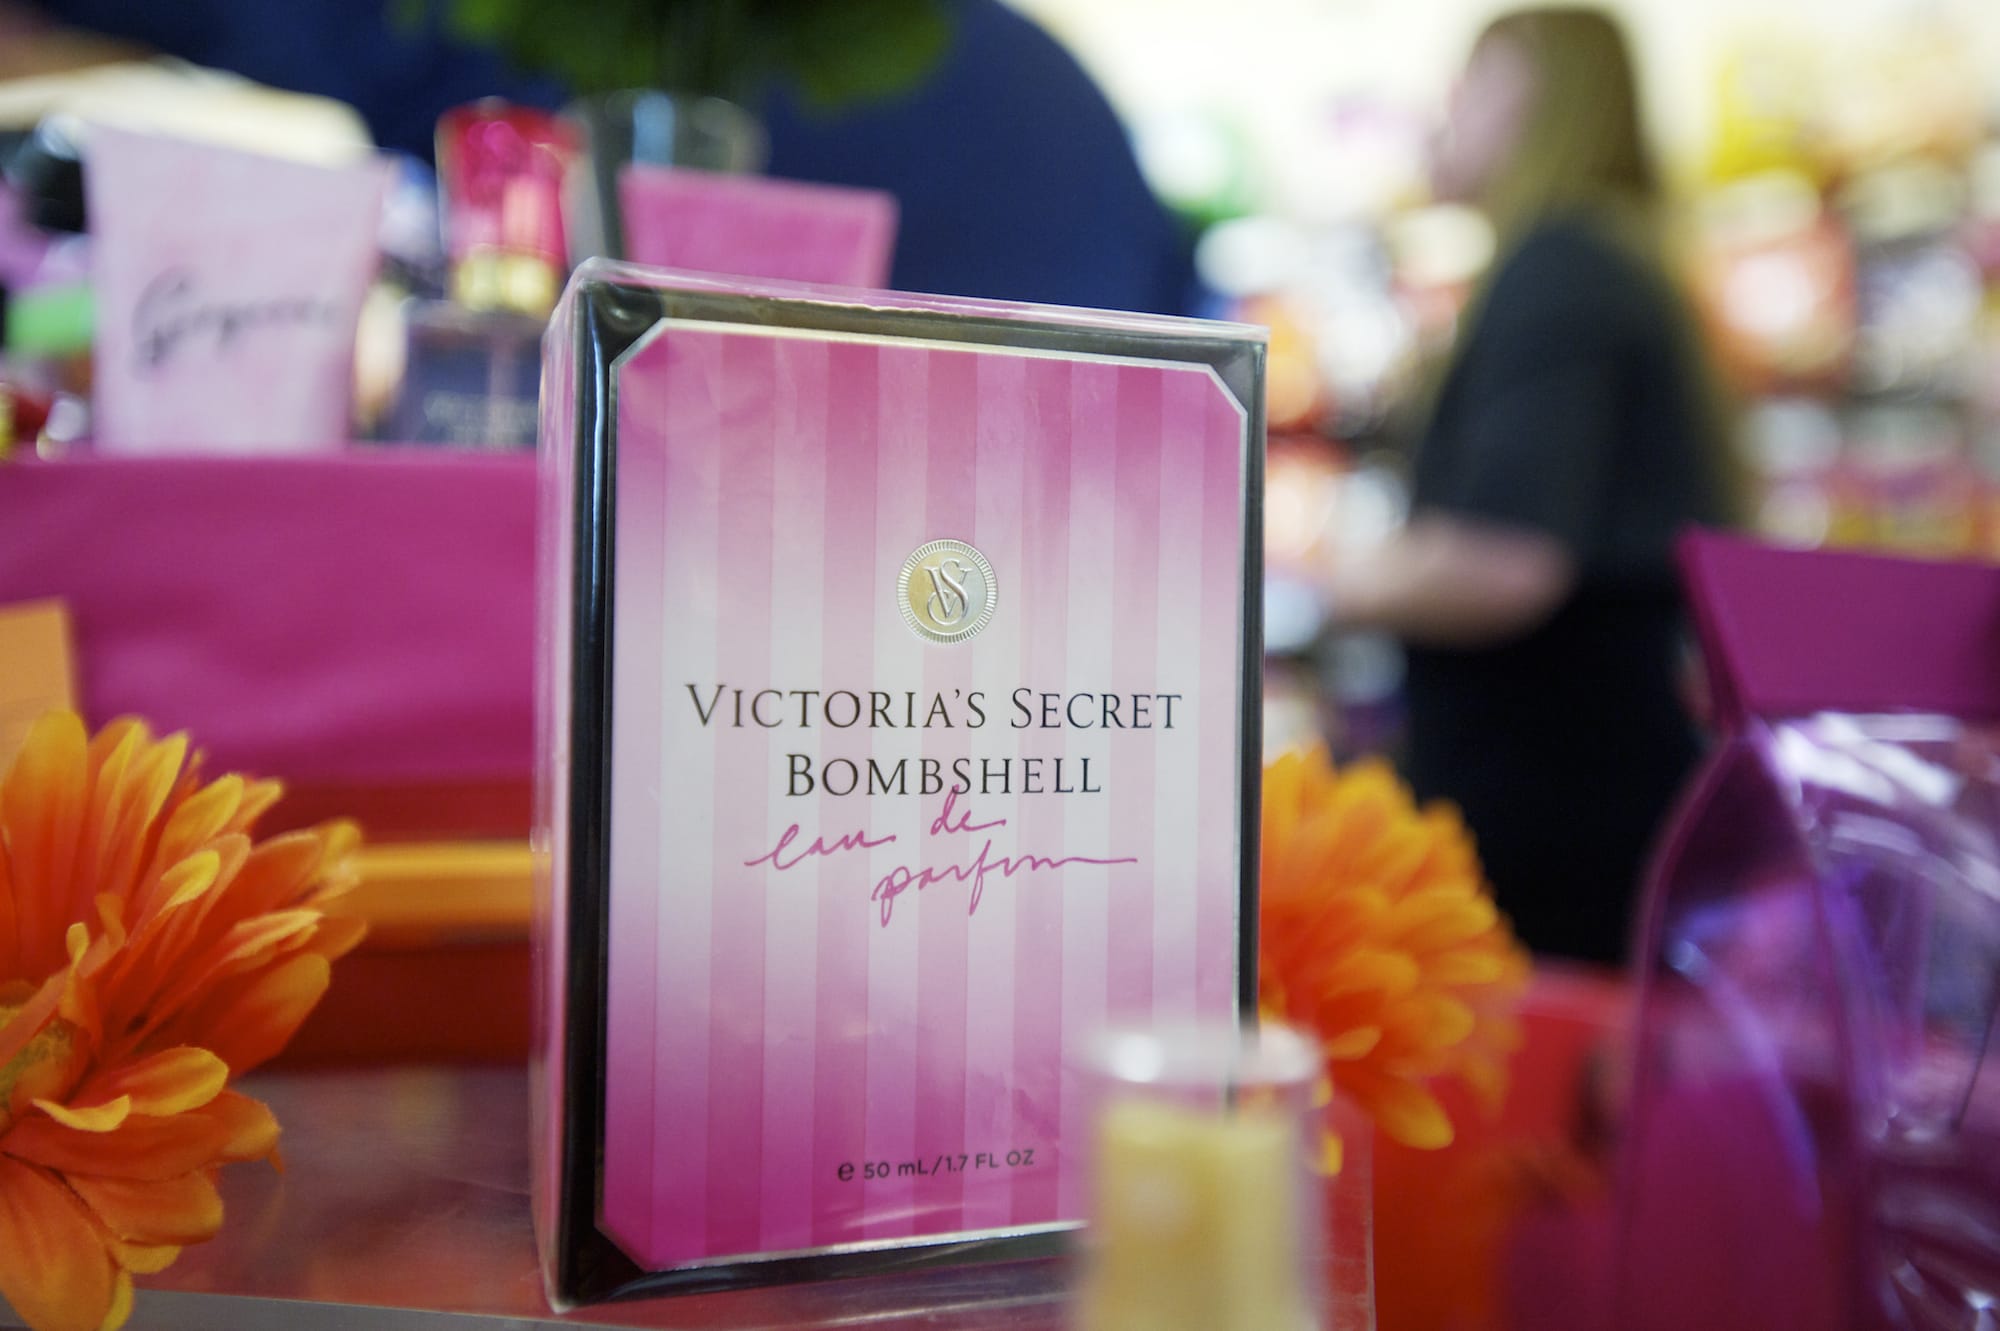 Victoria's Secret products are among the merchandise sold at the Vancouver Barracks shoppette.